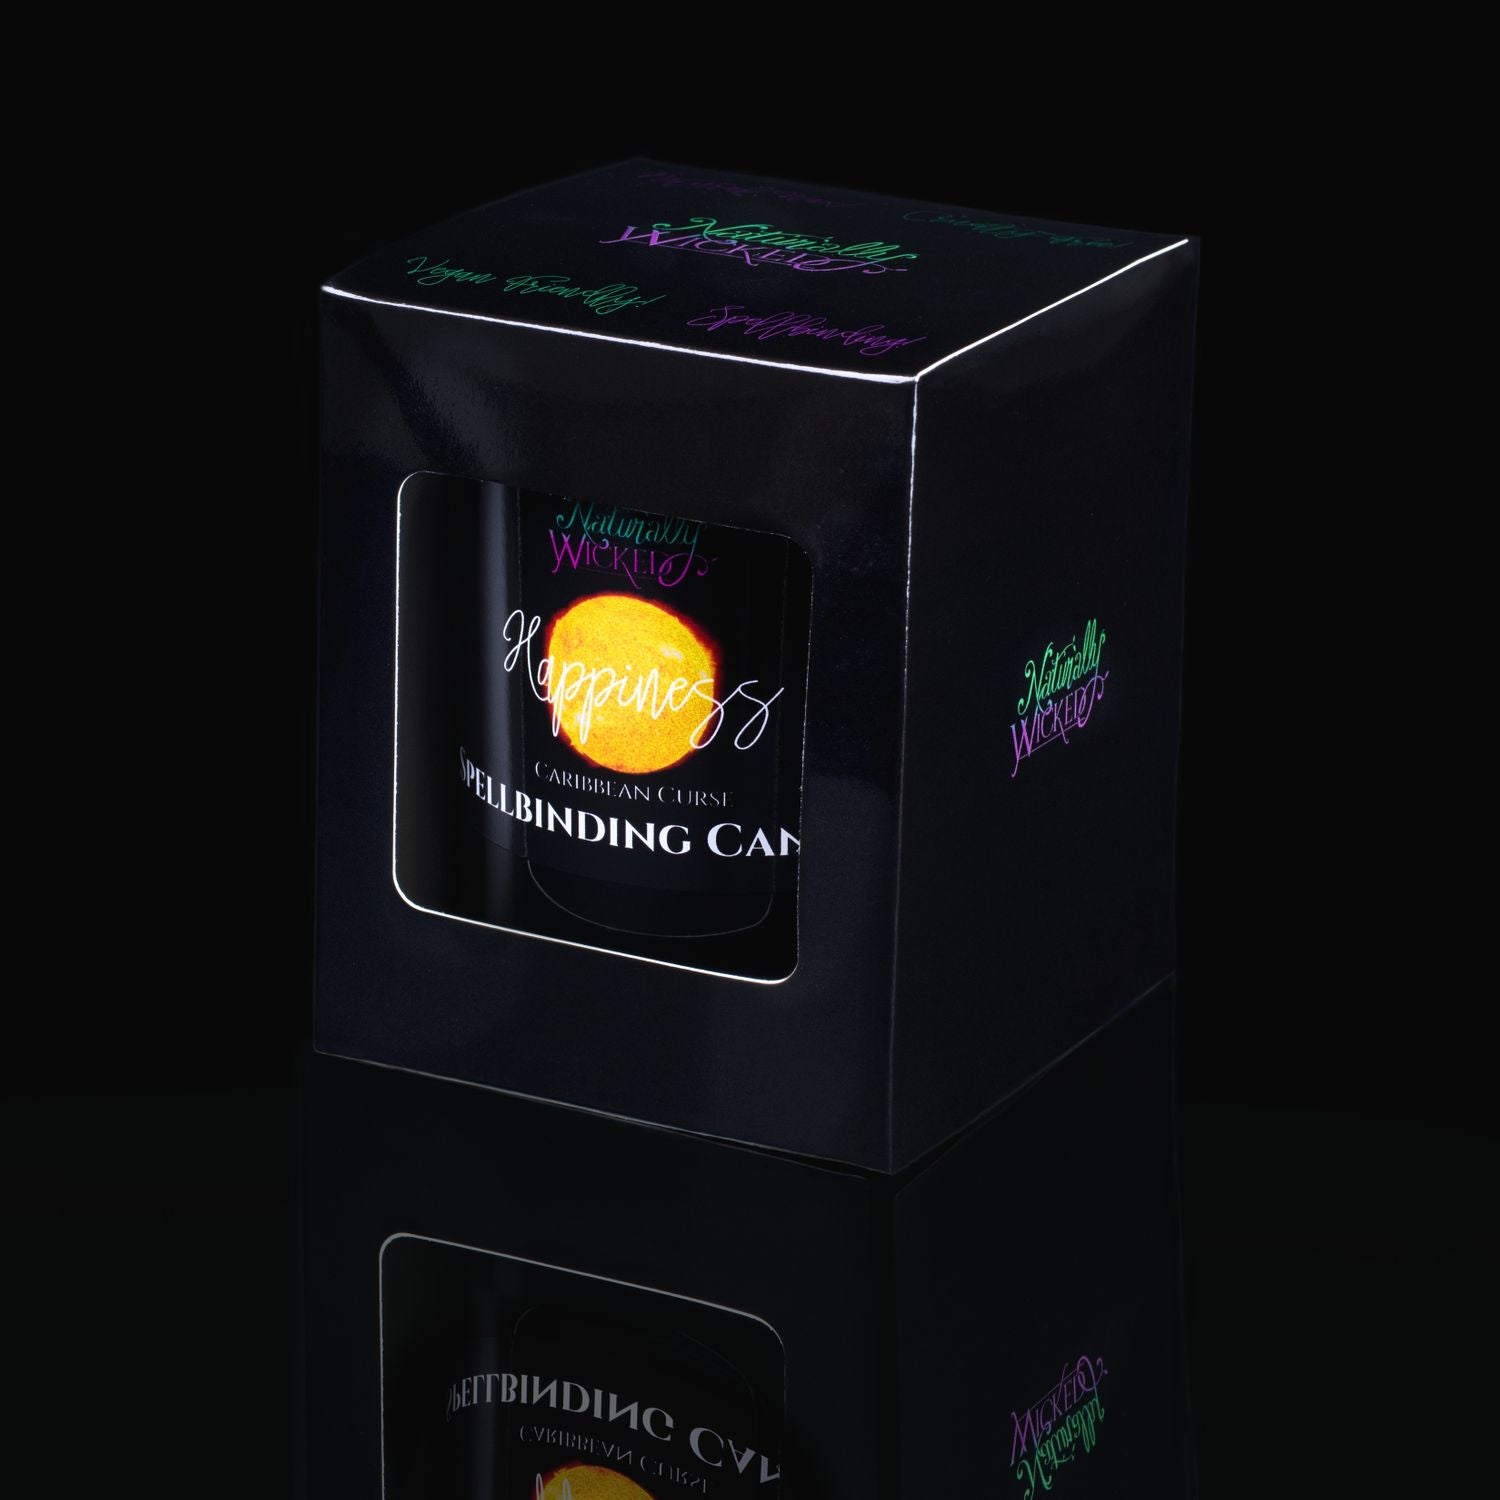 The Perfect Spell Candle Brings The Gift Of True Happiness. Naturally Wicked Spellbinding Happiness Candle Displayed In A Sleek Black Gloss Gift Box. The Candle Features Plant-Based Smooth Yellow Wax, A Wood Wick And A Beautiful Citrine Crystal.